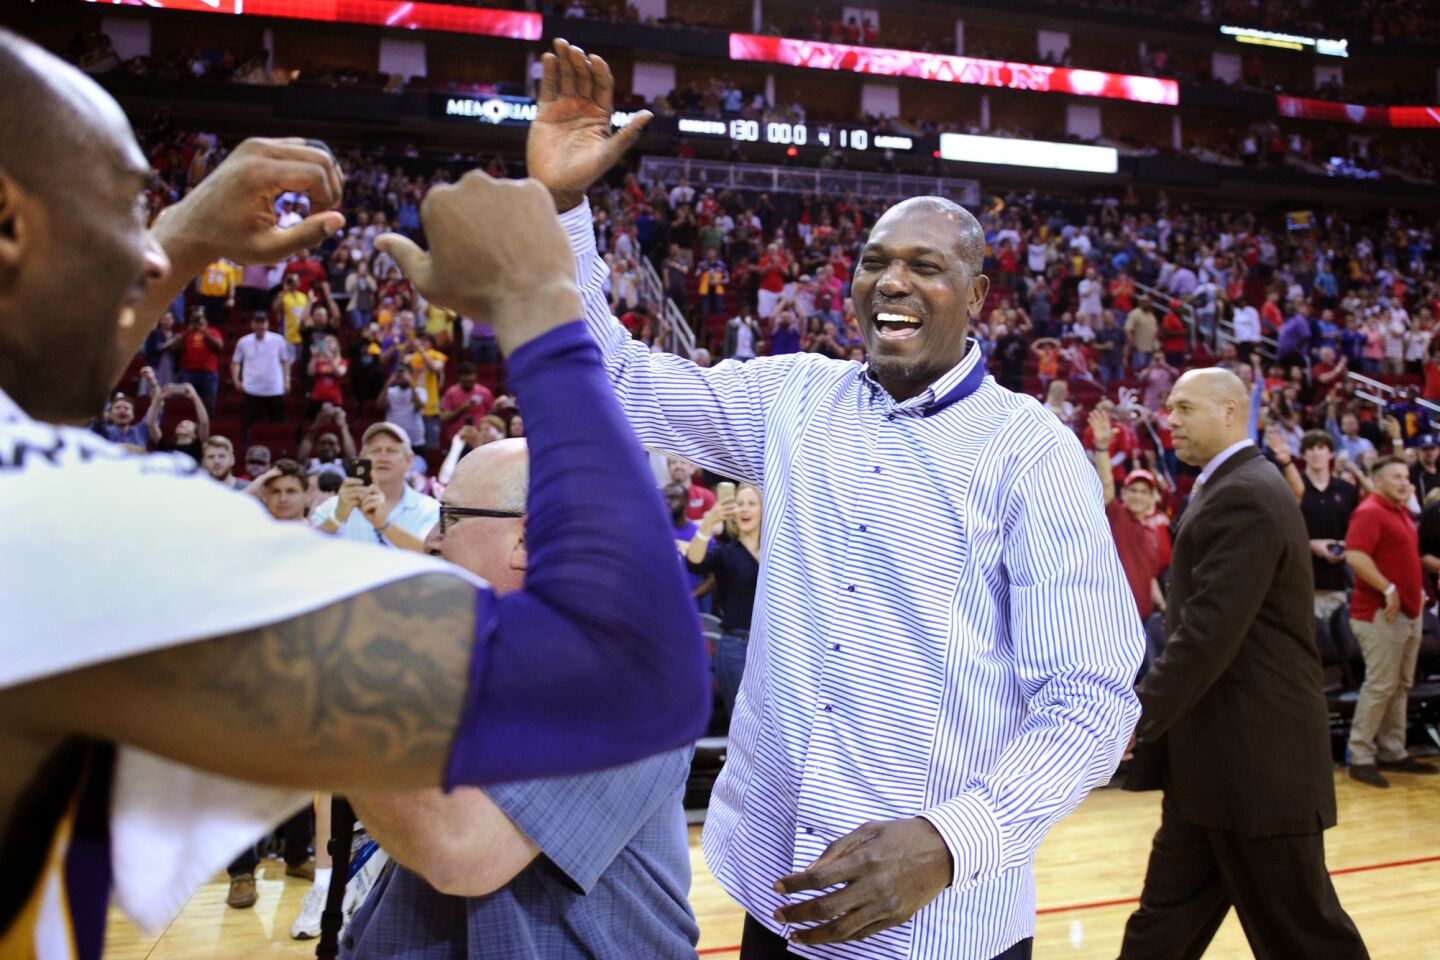 Former Rocket Hakeem Olajuwon and Lakers star Kobe Bryant greet each other after the game in Houston.